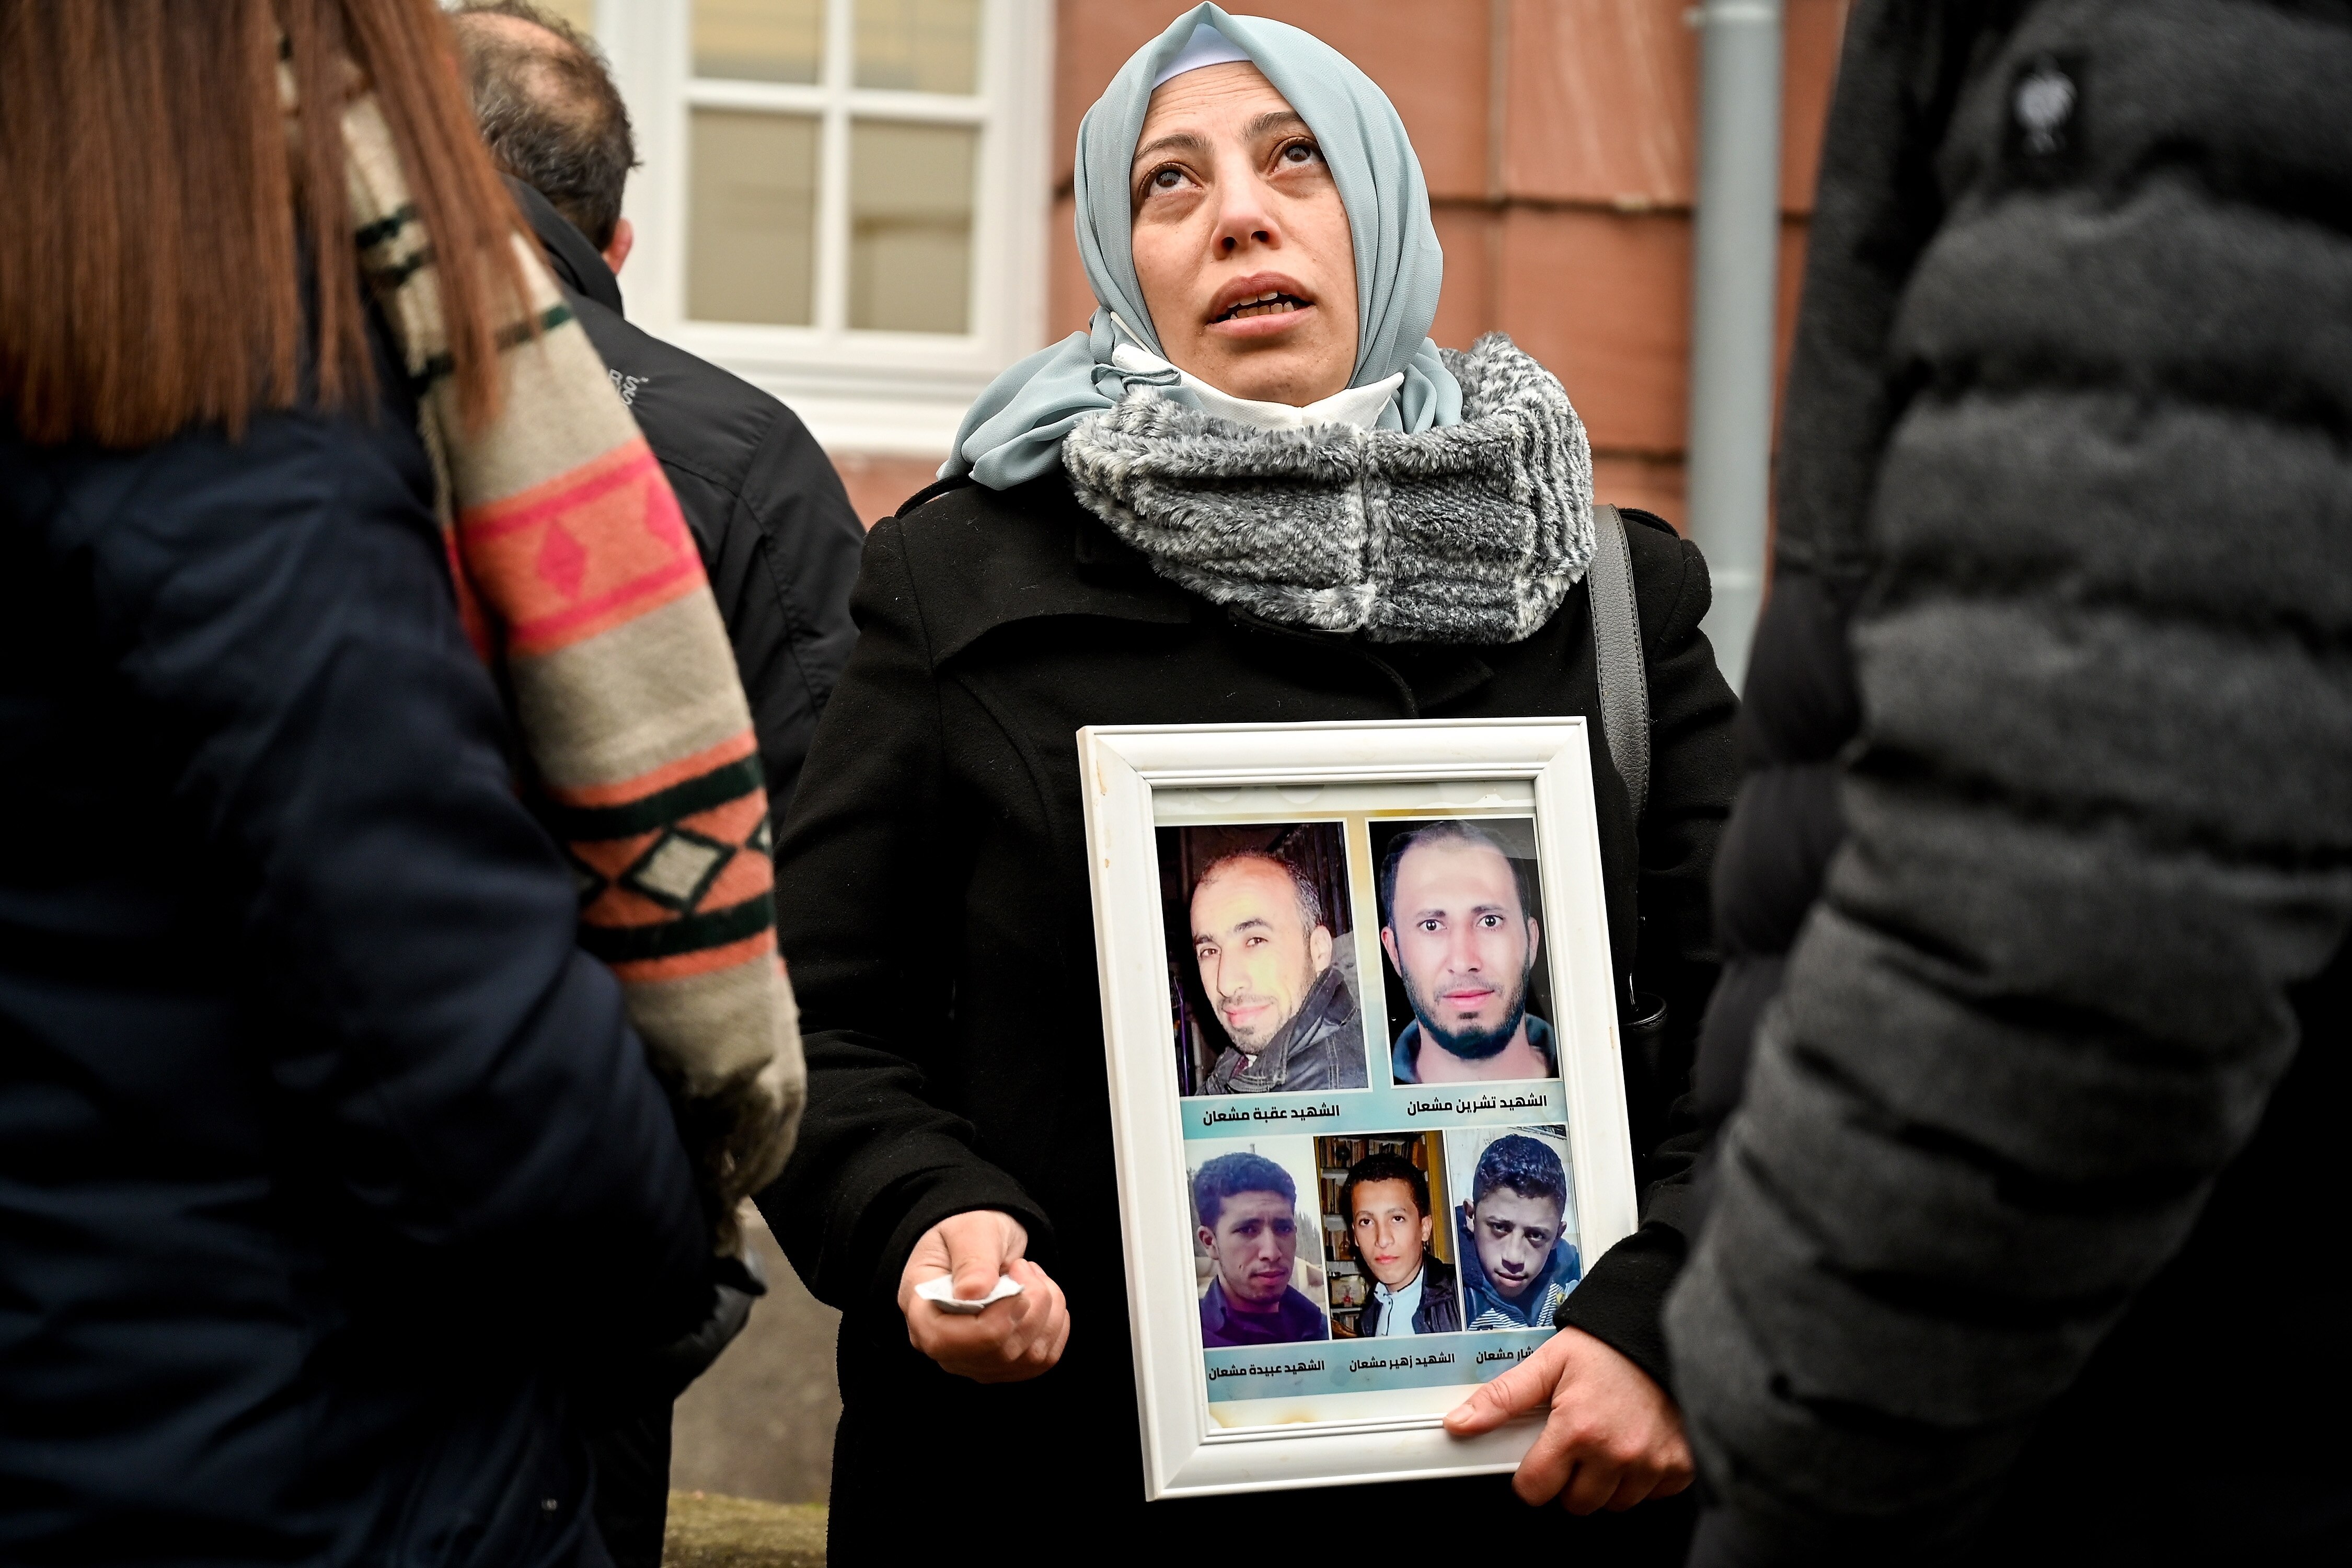 Yasmen Almashan at the Higher Regional Court in Koblenz, Germany, shows a picture of her brothers, who were killed in Syria. Photo: 13 January, 2022.